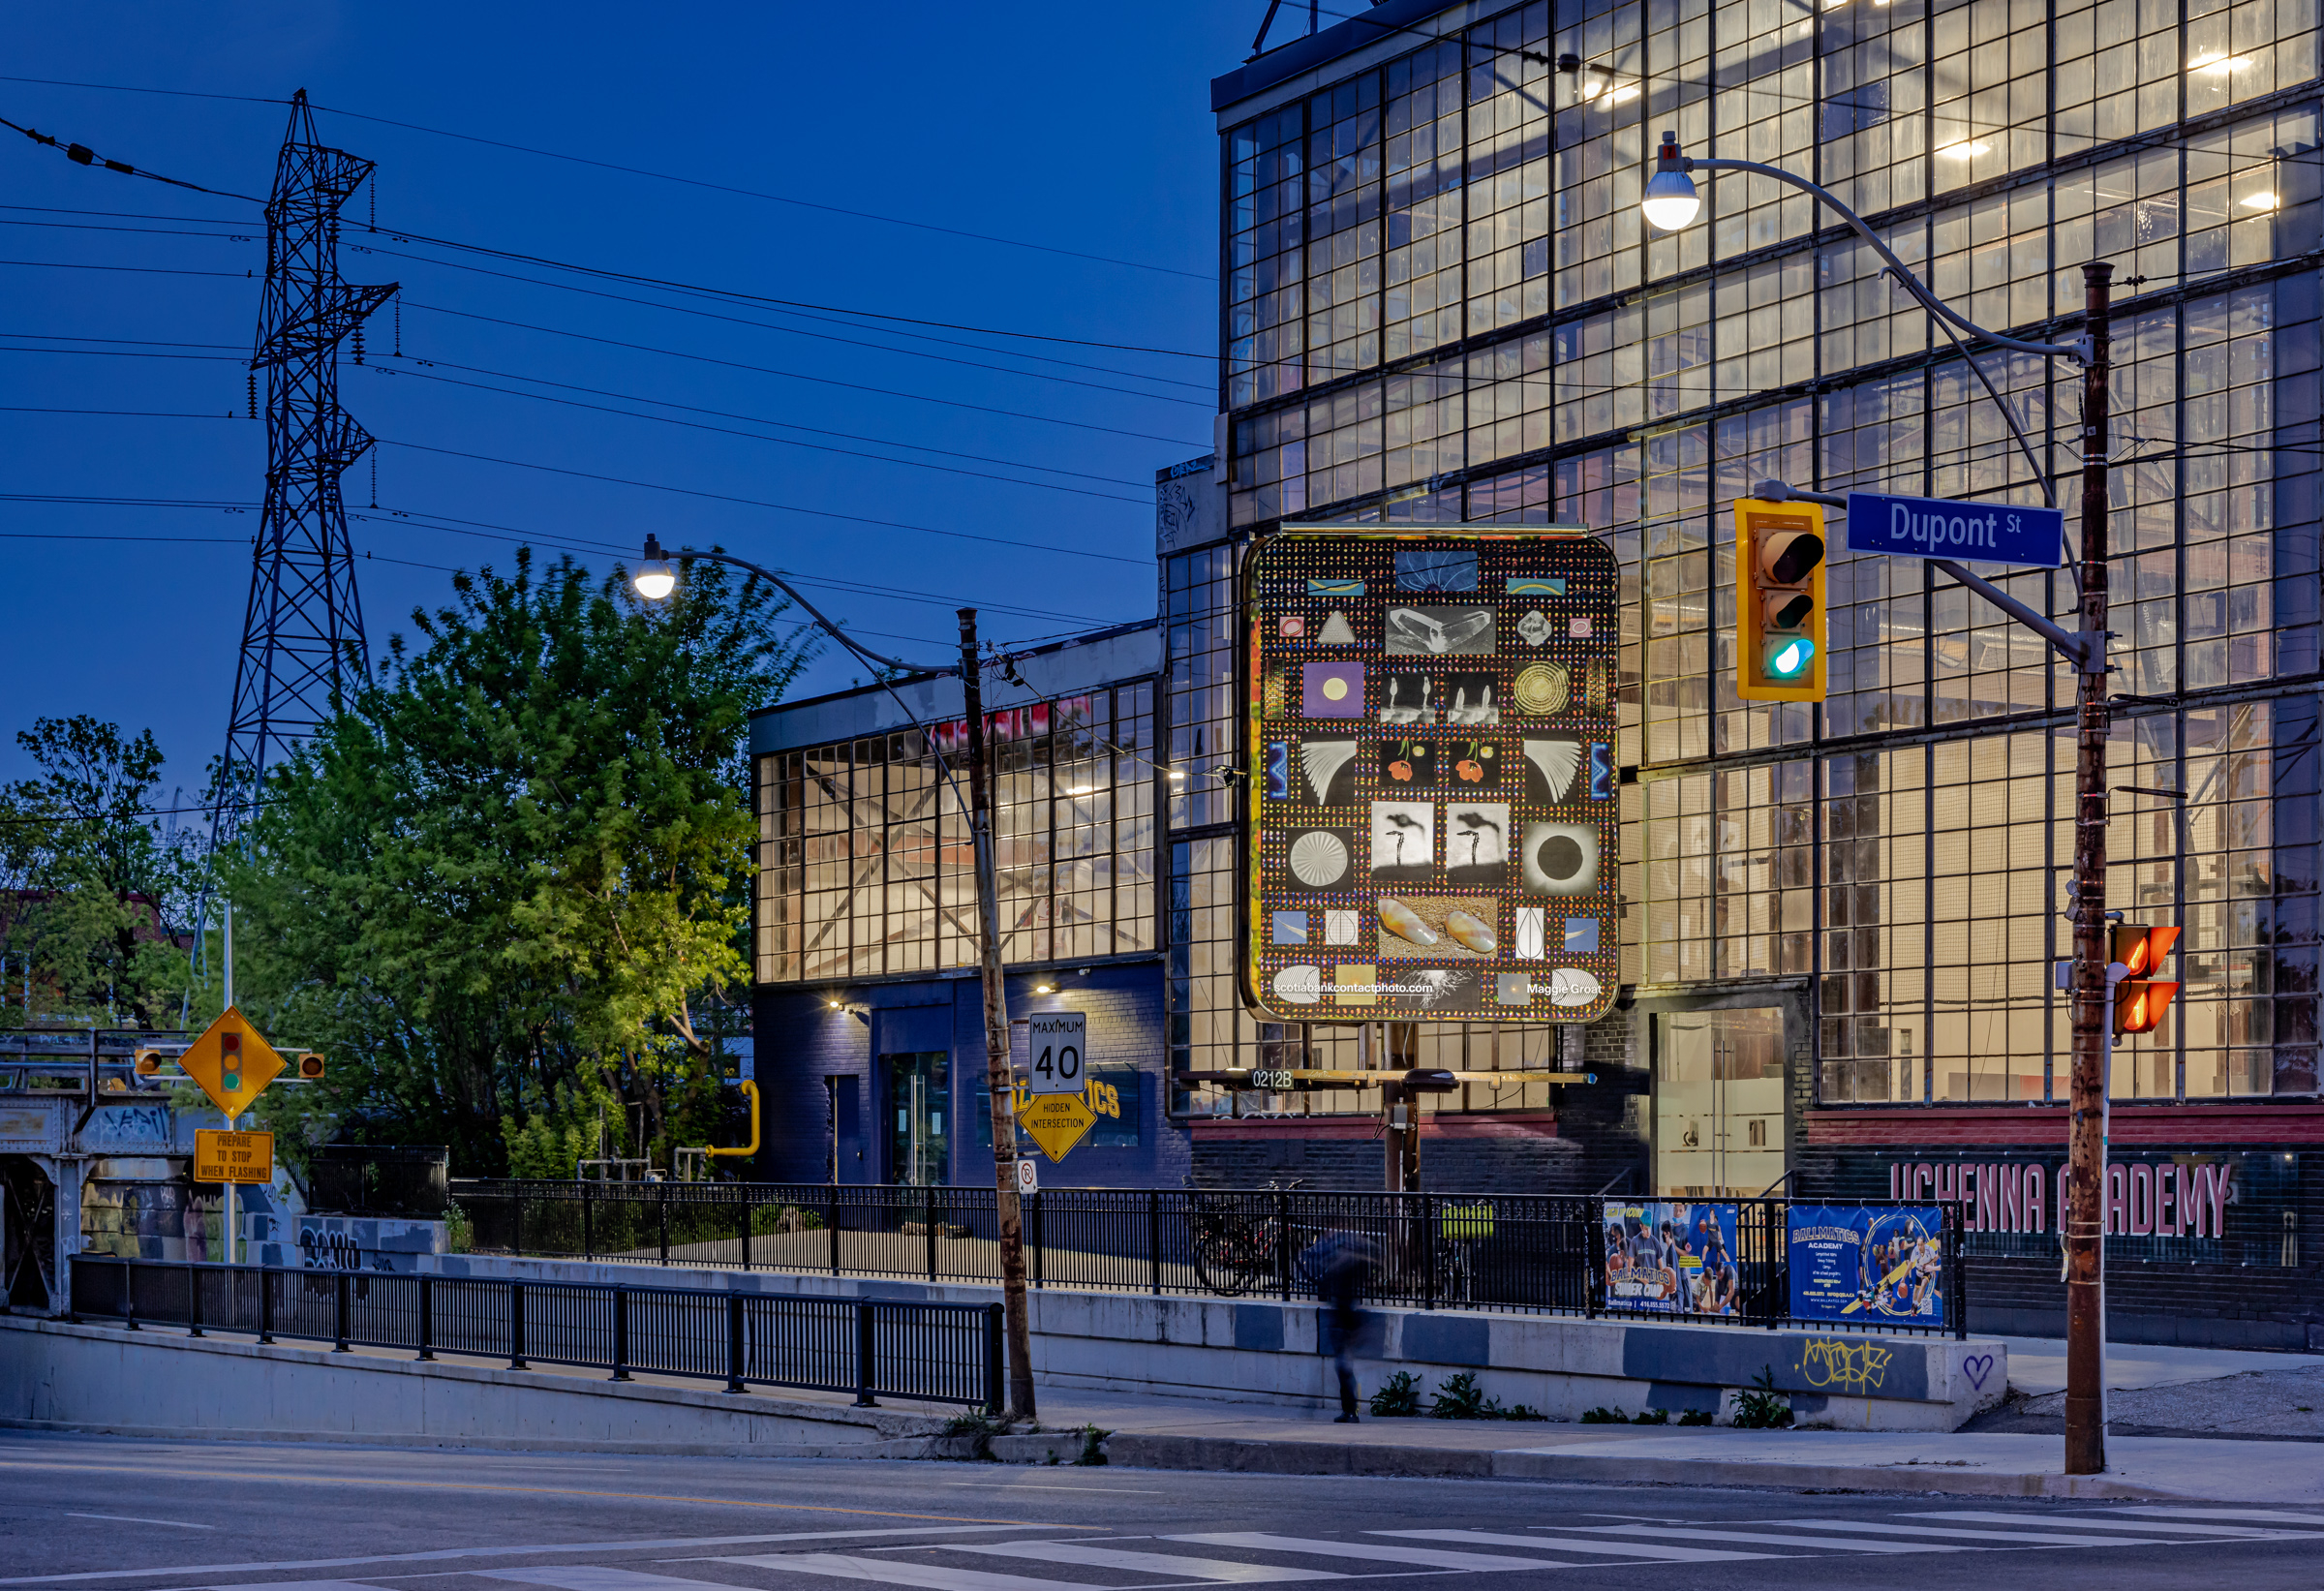     Maggie Groat, DOUBLE PENDULUM, 2023, installation view, billboards at Dovercourt Rd and Dupont St, Toronto. Courtesy of the artist and Scotiabank CONTACT Photography Festival. Photo: Toni Hafkenscheid

